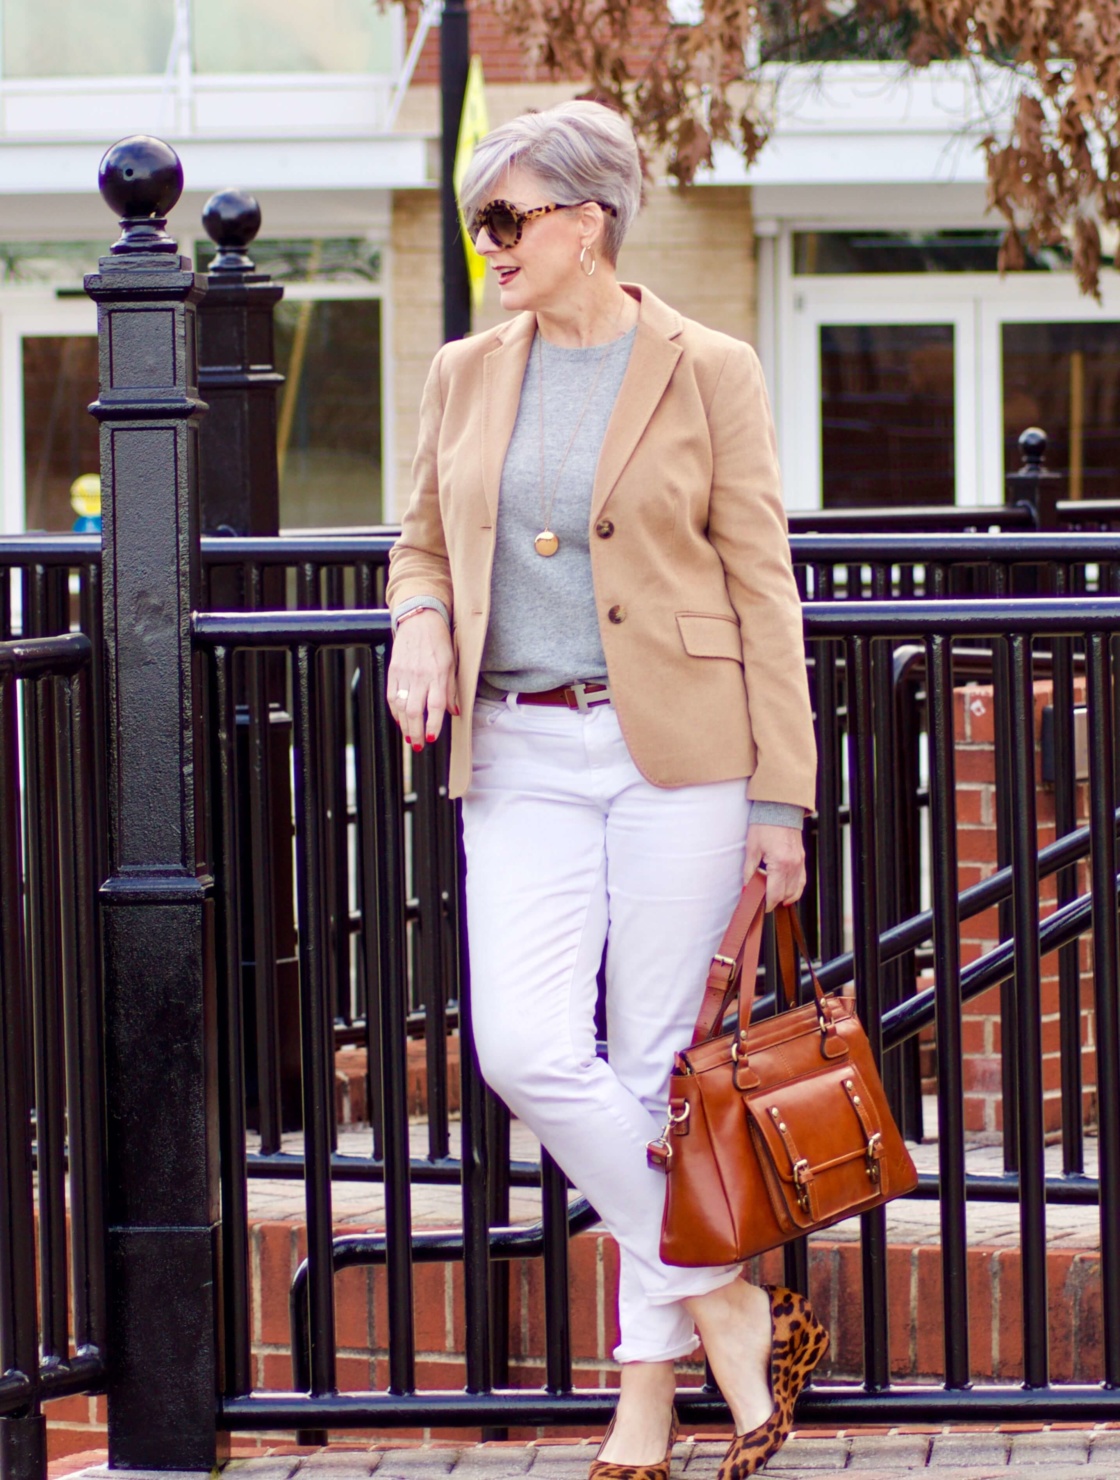 beth from Style at a Certain Age wears a camel blazer, grey cashmere crewneck, white denim, and leopard shoes